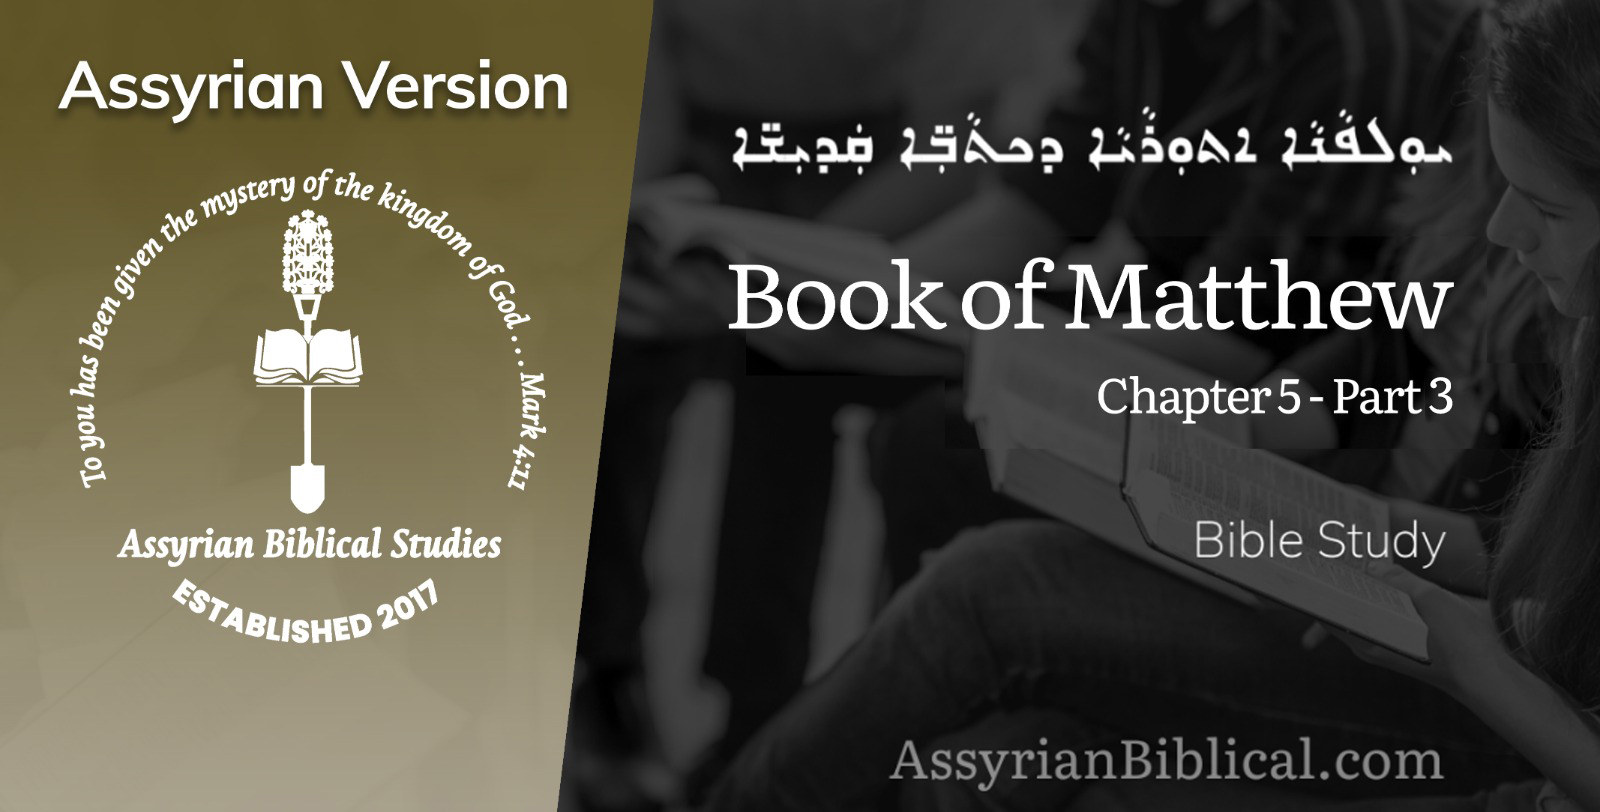 Image of video thumbnail for Book of Mathew Chapter 5 Part 3 in Assyrian